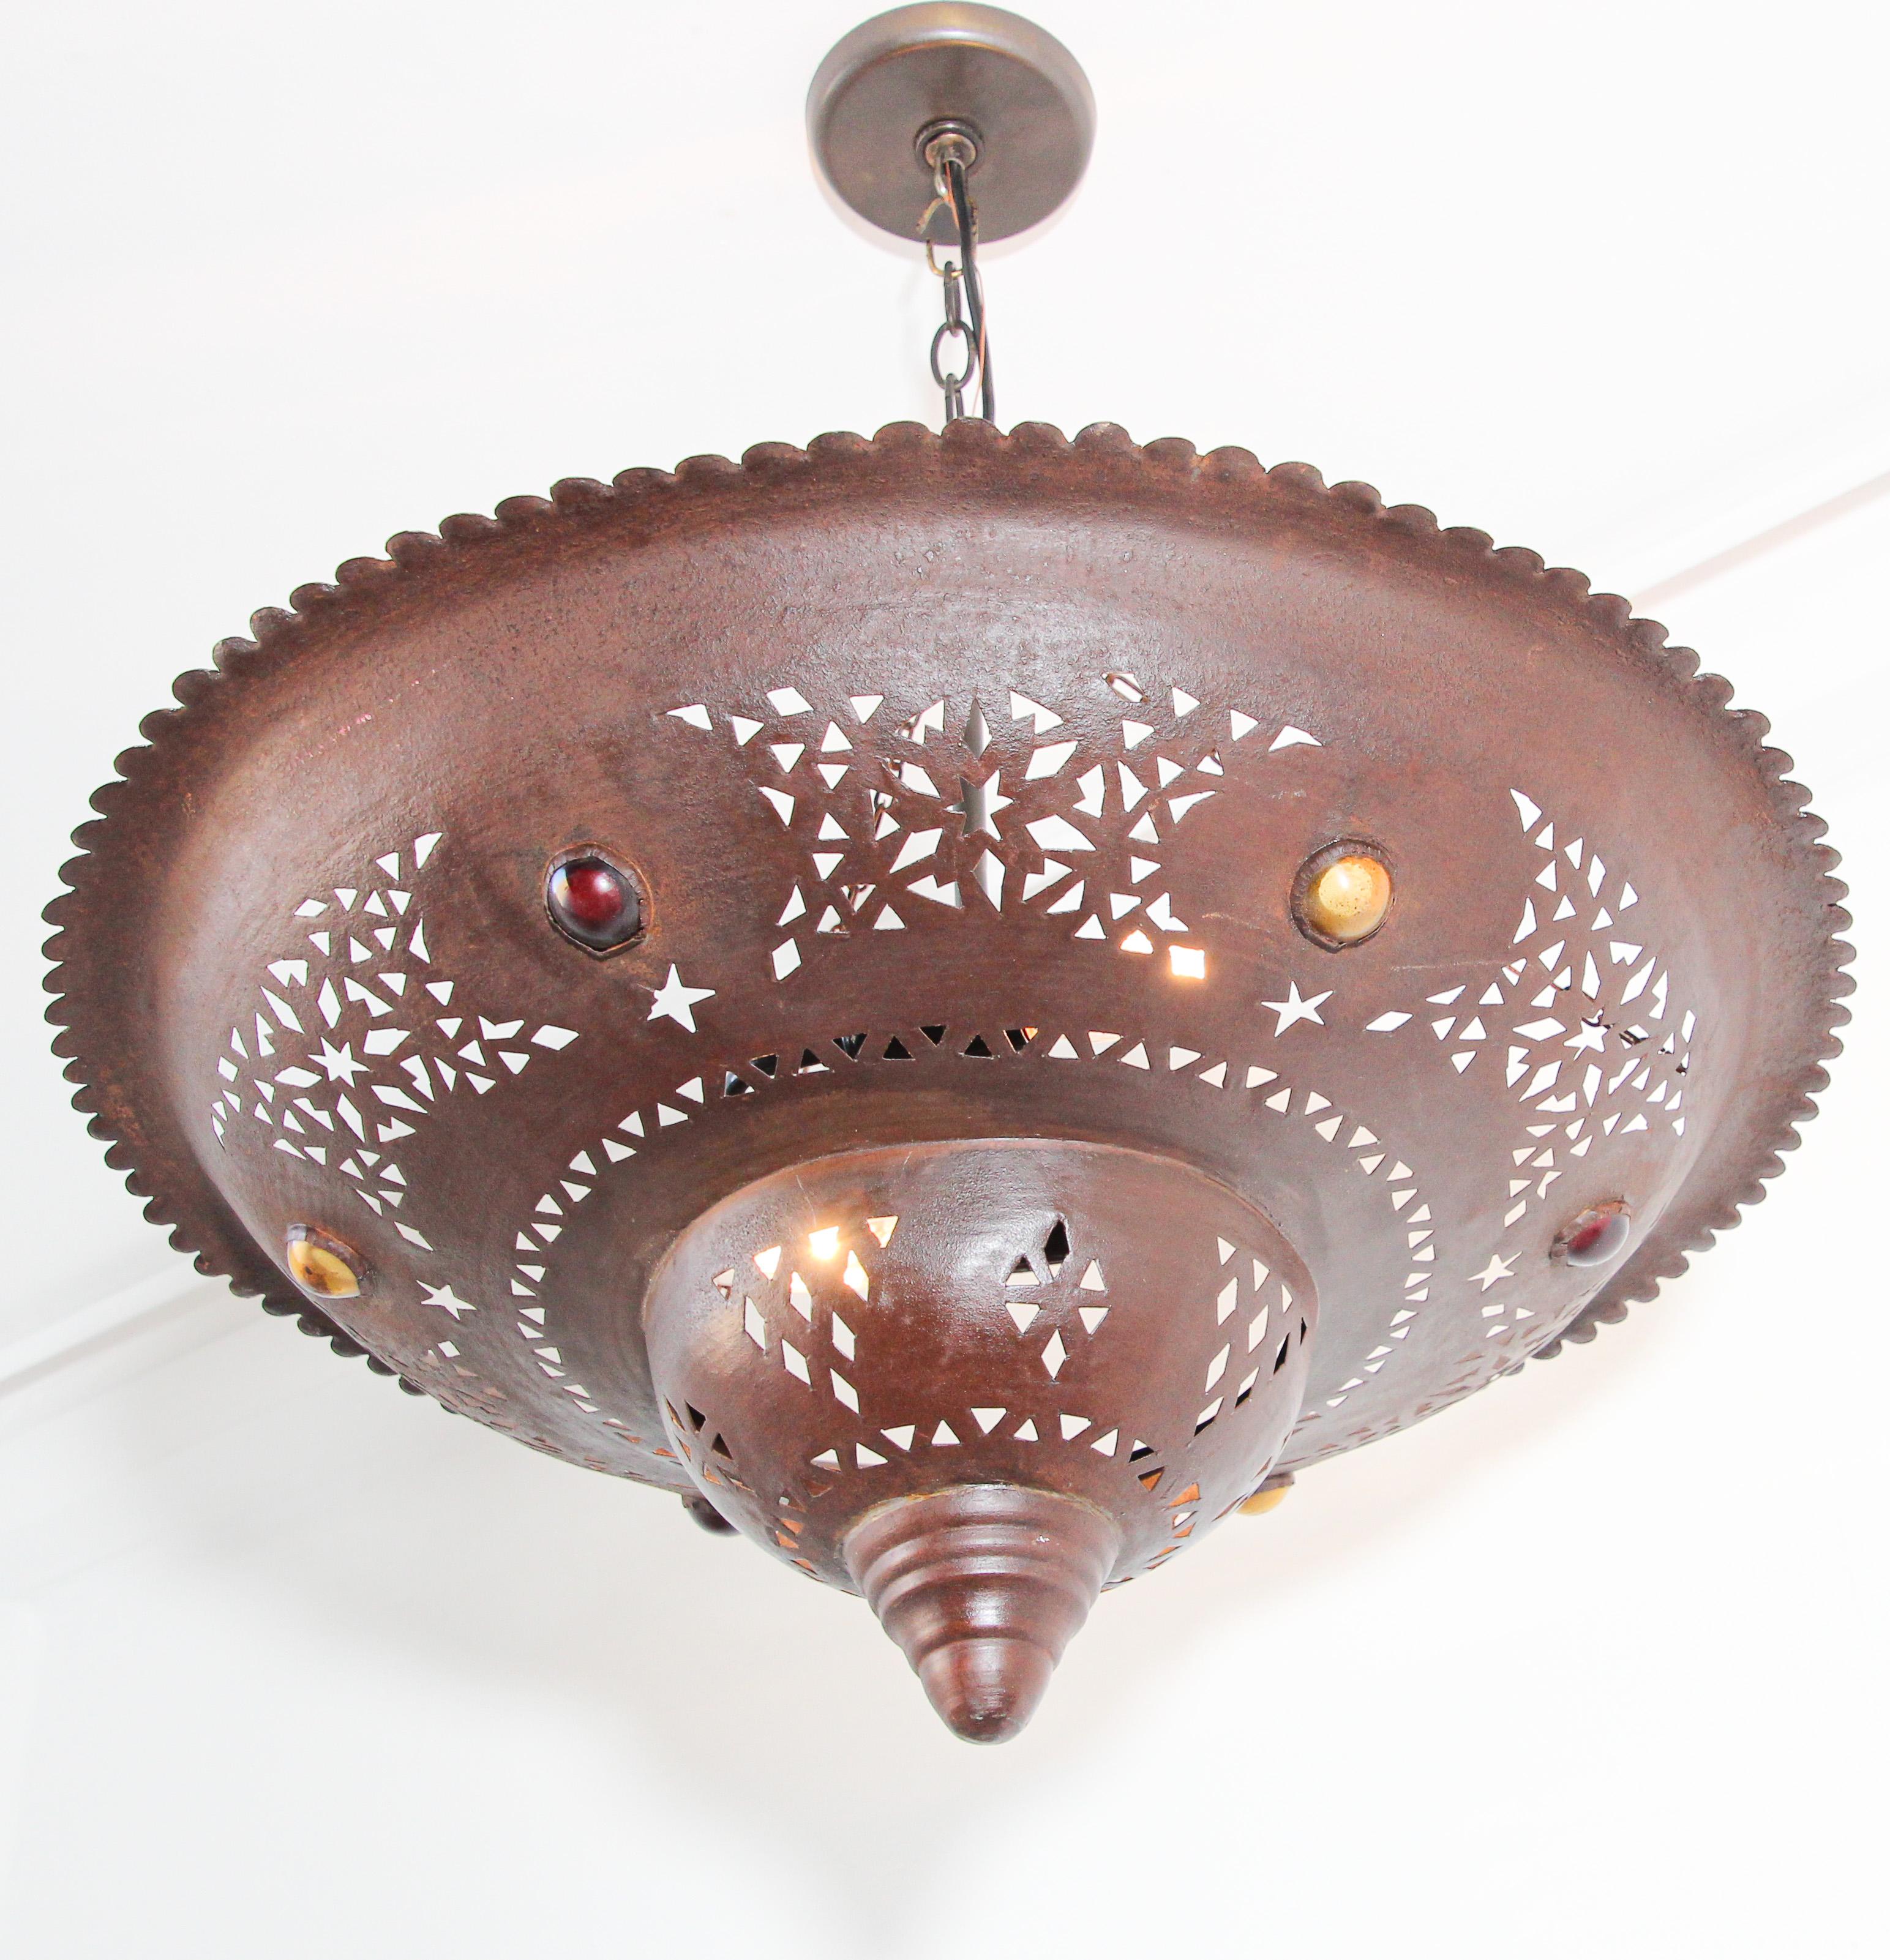 Handcrafted large Moroccan metal chandelier handcut with Moorish design.
Brown dark color metal hammered and inlaid with round jeweled colored glass in red and amber.
Rewired ready to use.
Additional chains could be added to your